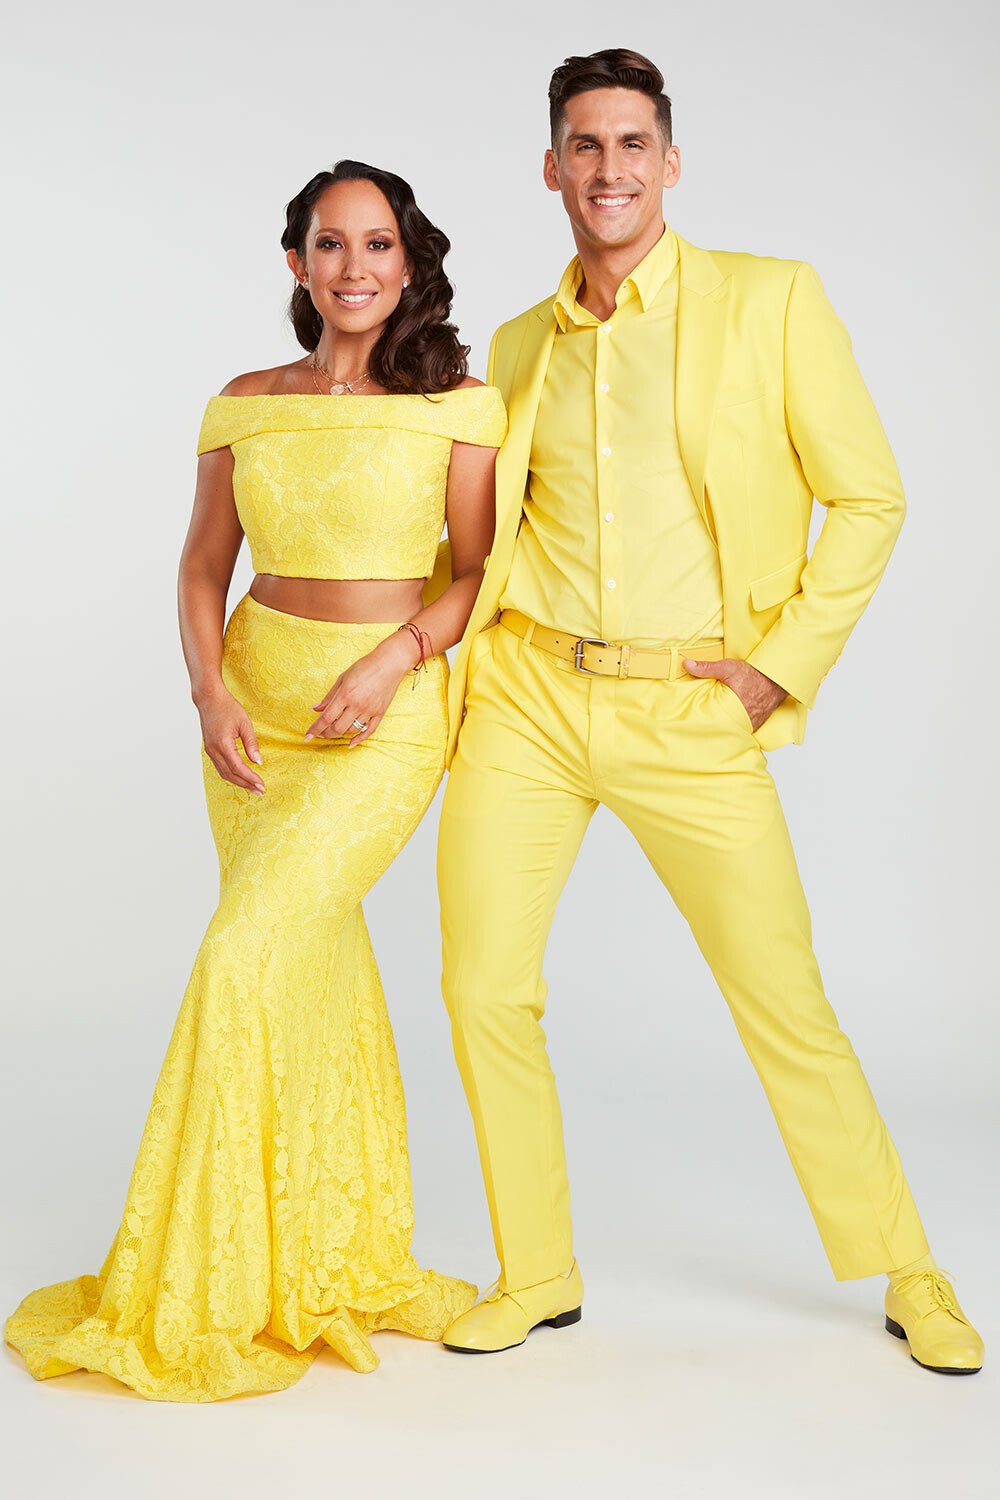 <i>Maarten de Boer/ABC</i><br/>Cheryl Burke's 'Dancing with the Stars' partner Cody Rigsby tests positive for Covid-19.